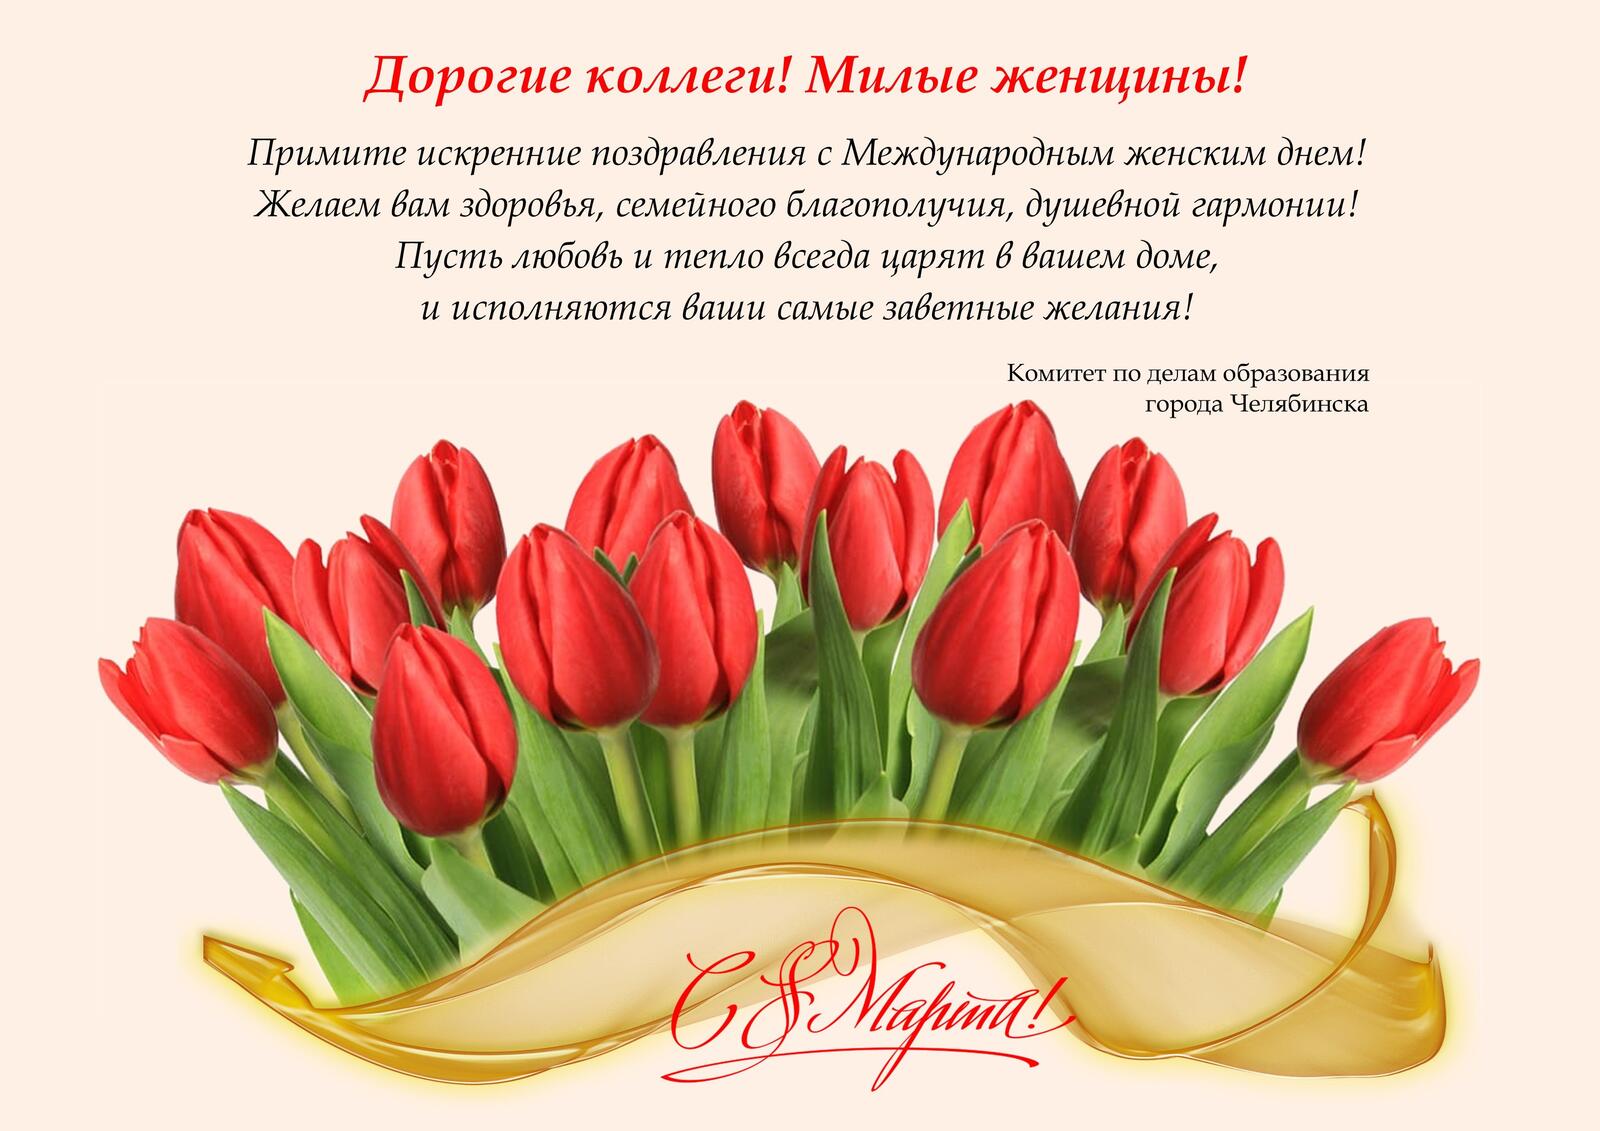 Postcard to colleagues on March 8